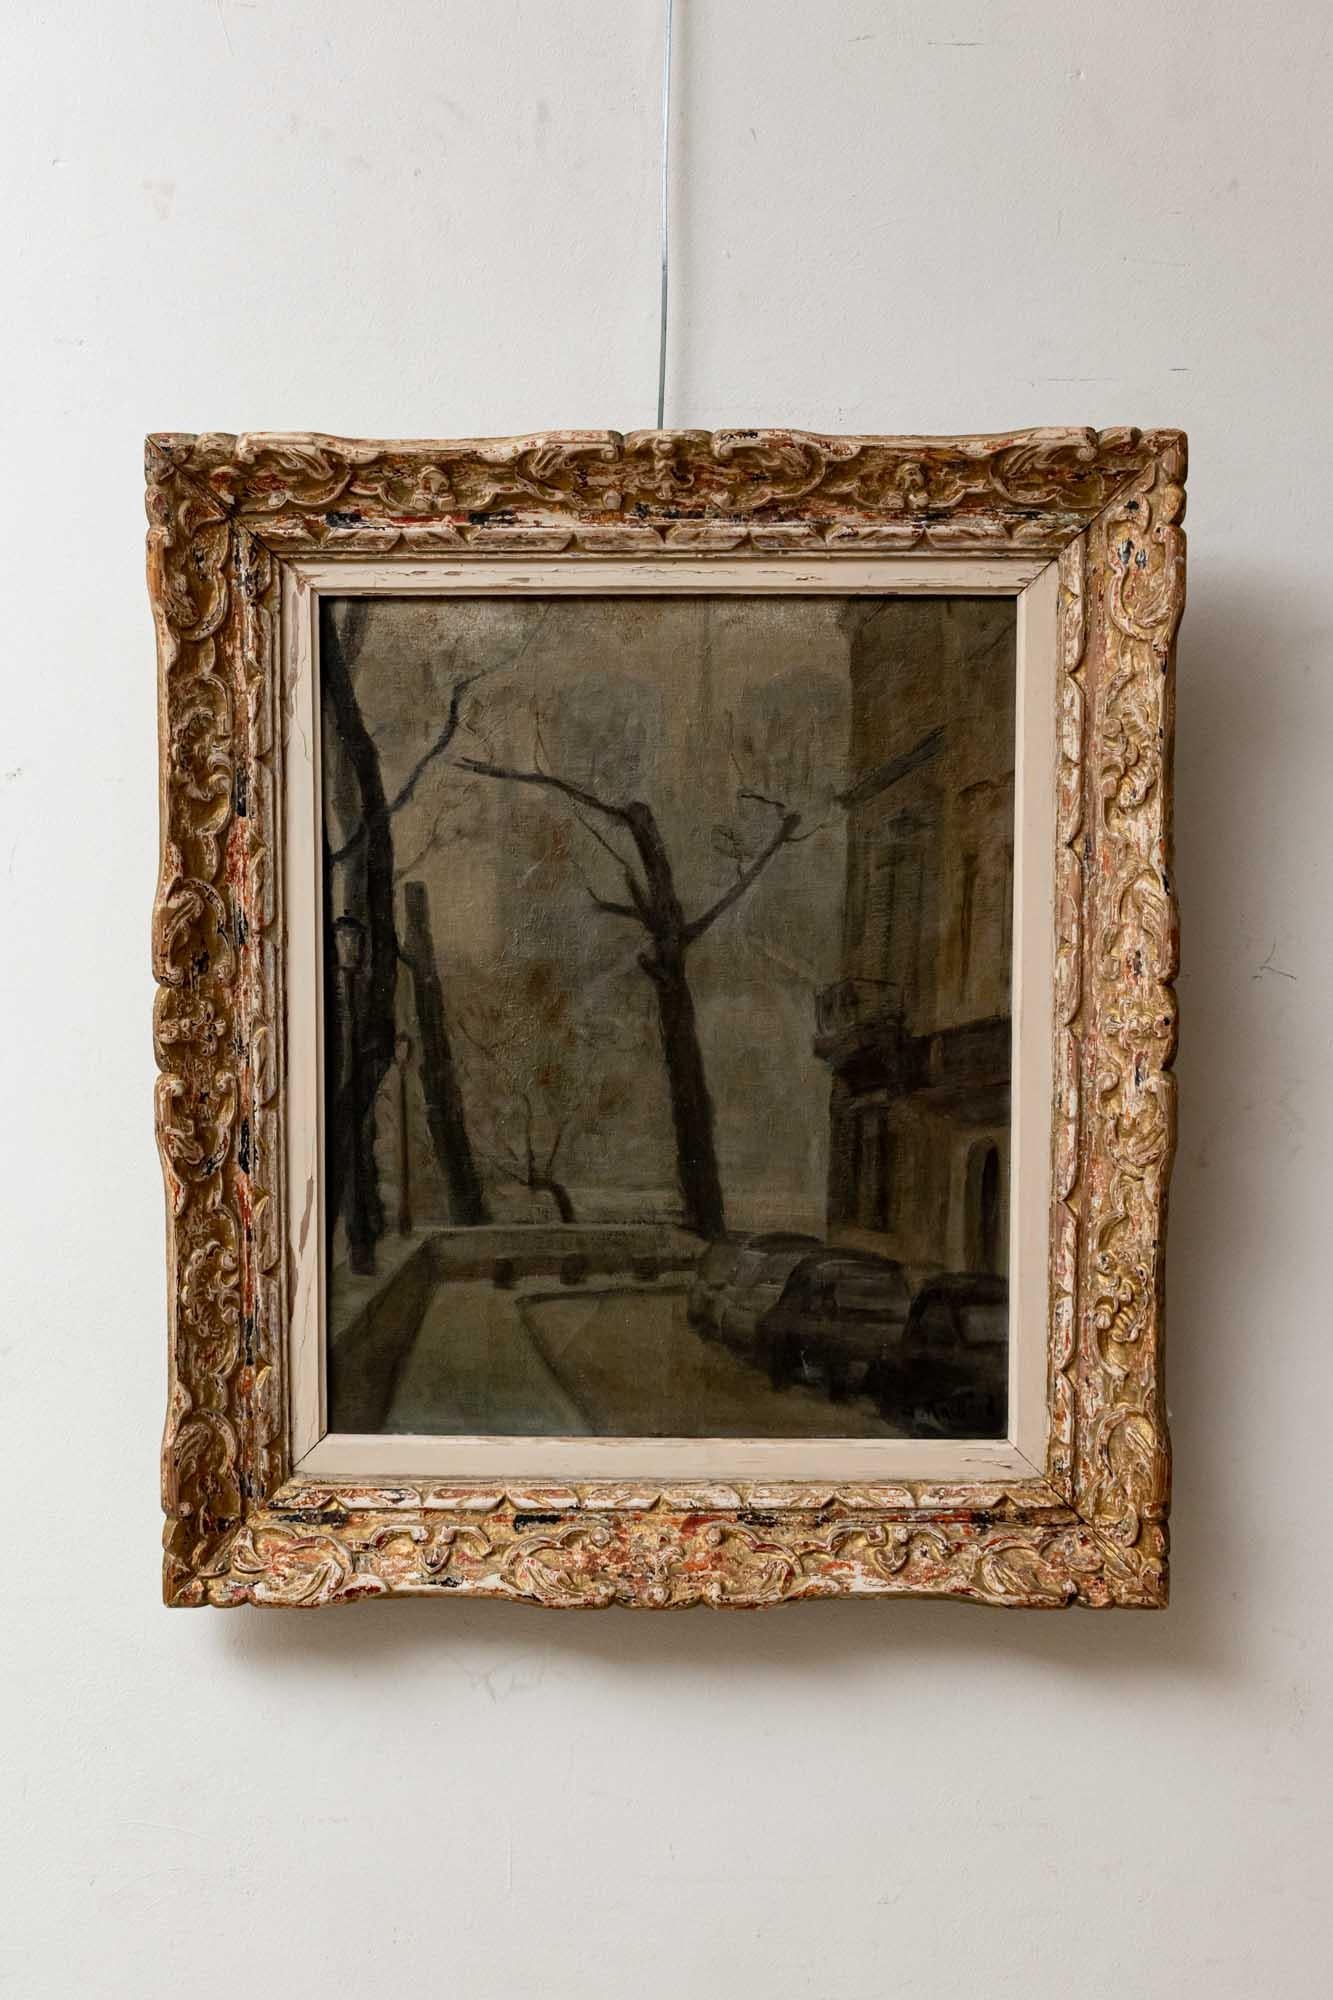 1950s French oil painting of a Parisian winter scene in its original carved wood frame. The bleak but calm winter scene featuring bare, stark trees which is by the Seine river in Paris. Artist unknown. Unsigned.
The oil and frame are in very good